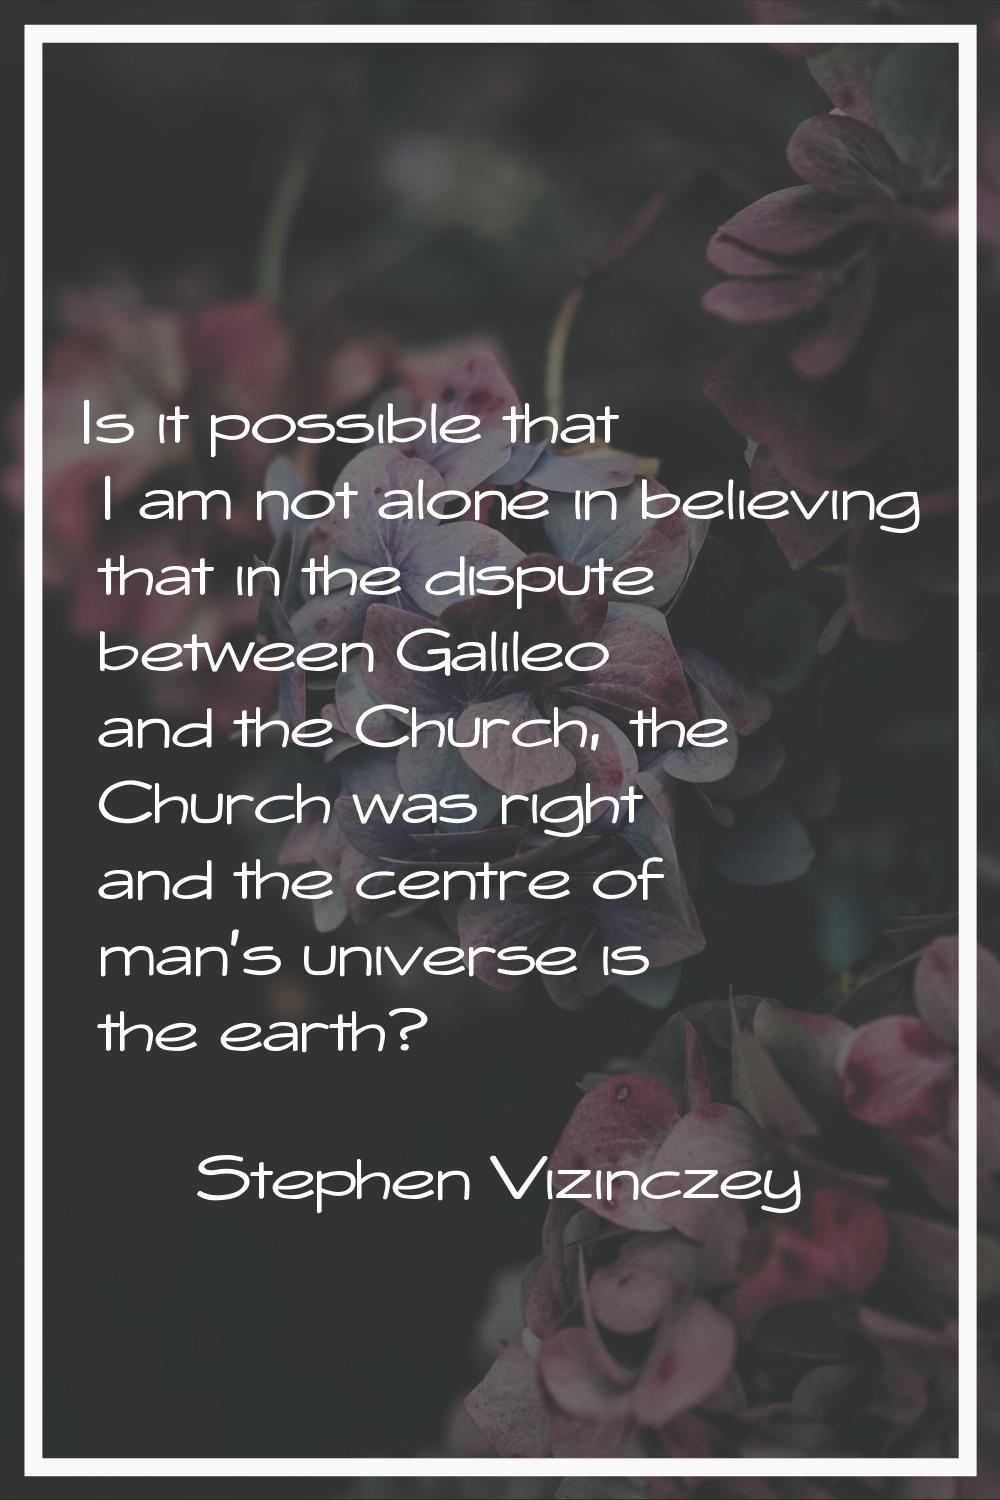 Is it possible that I am not alone in believing that in the dispute between Galileo and the Church,